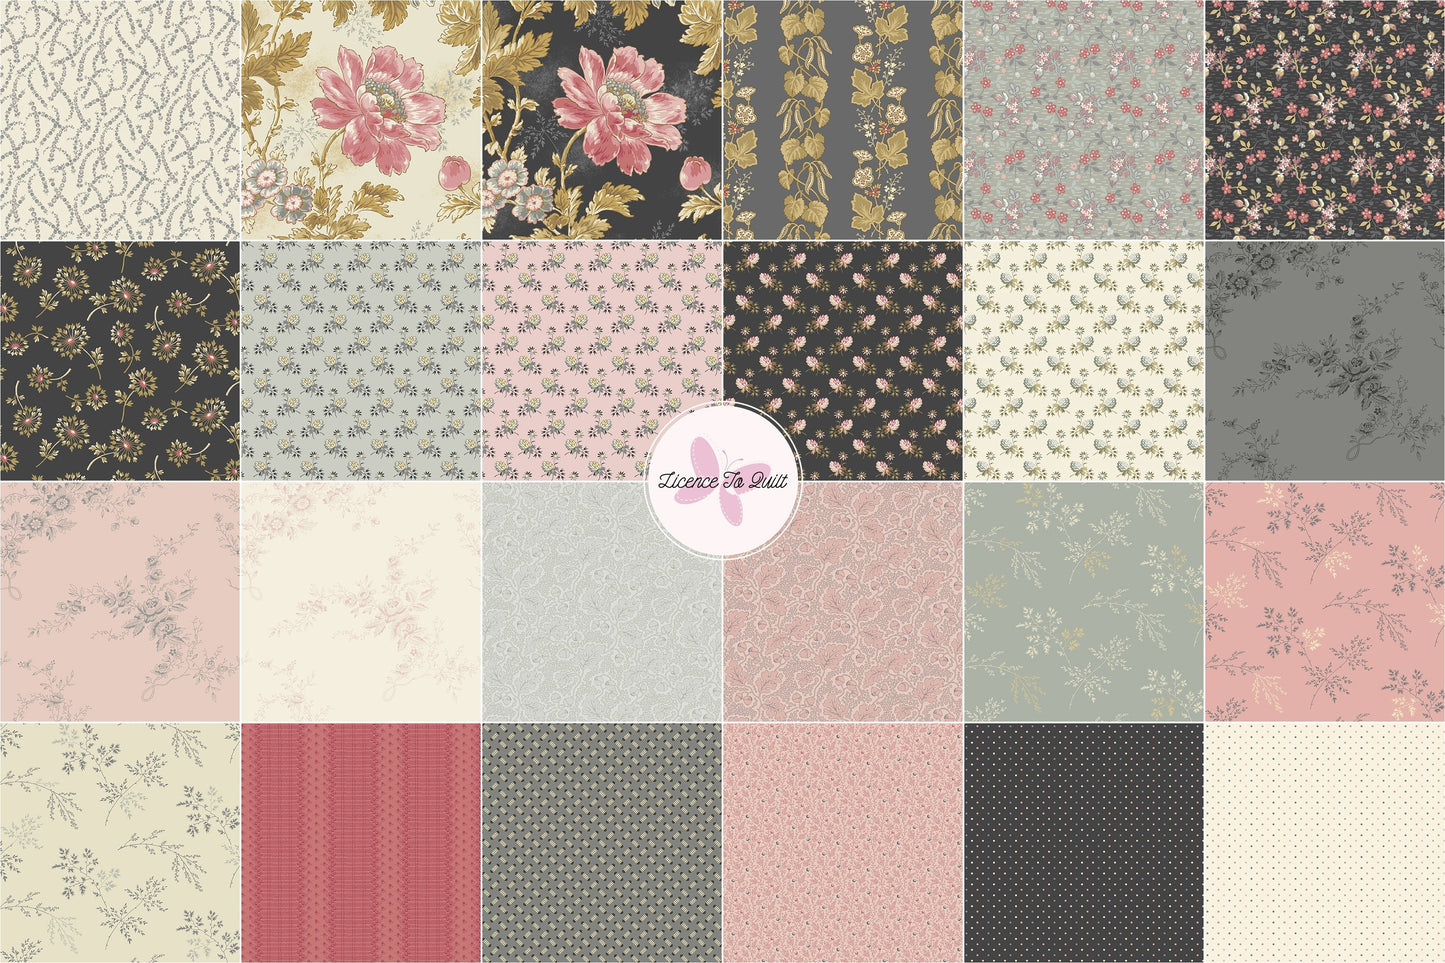 Moonstone - Linen Clover - Licence To Quilt